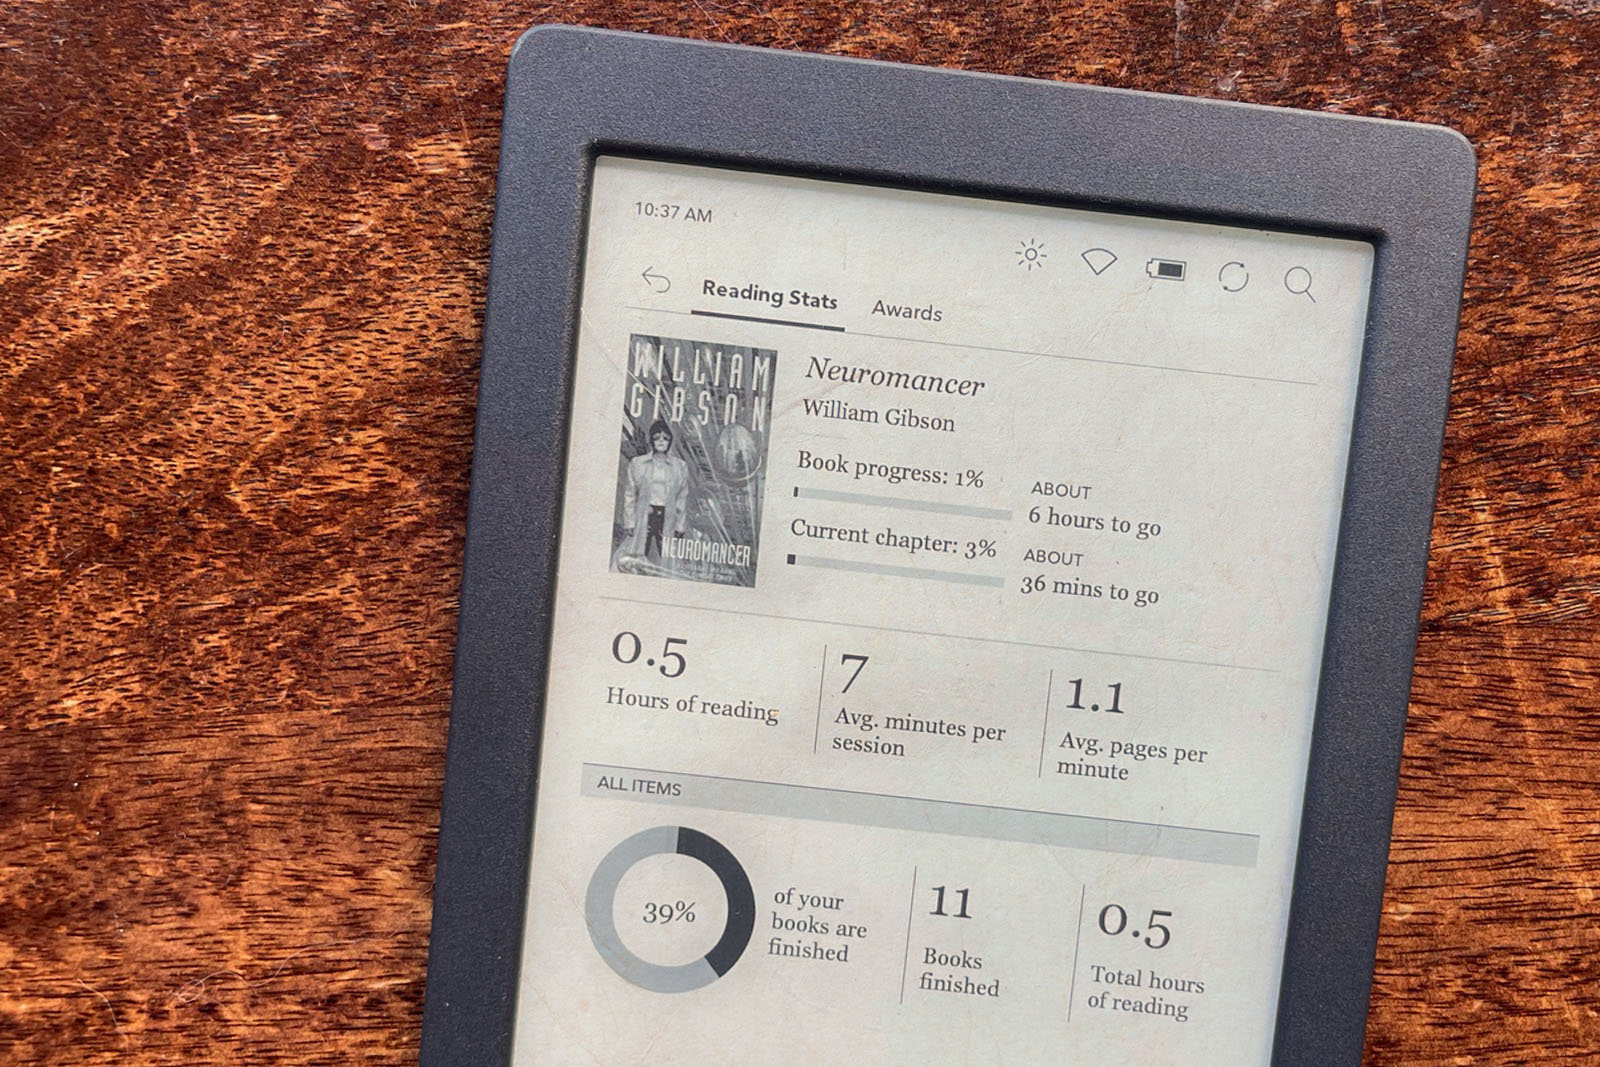 Review of the Kobo Nia, more affordable and more resolution